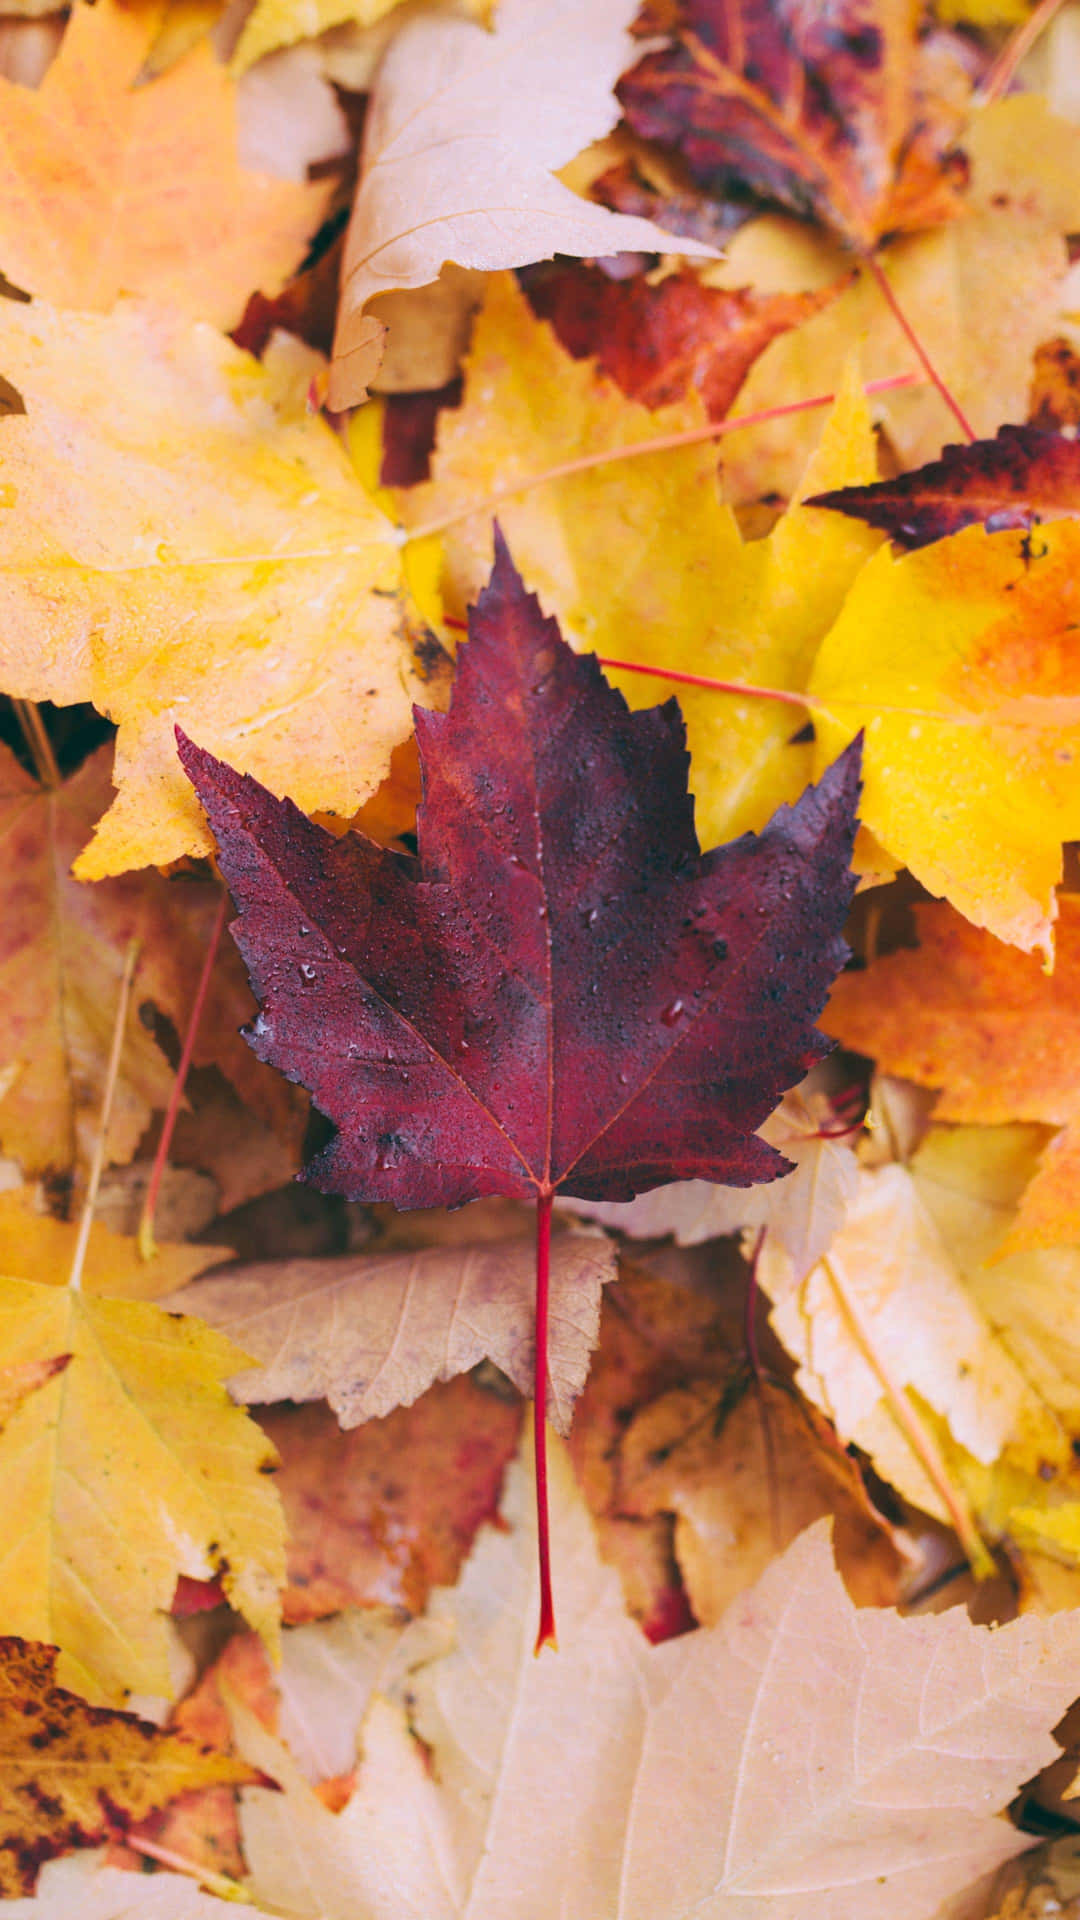 Variations of red, rust, burnt orange, and yellow makes this autumn leaf a beautiful sight Wallpaper